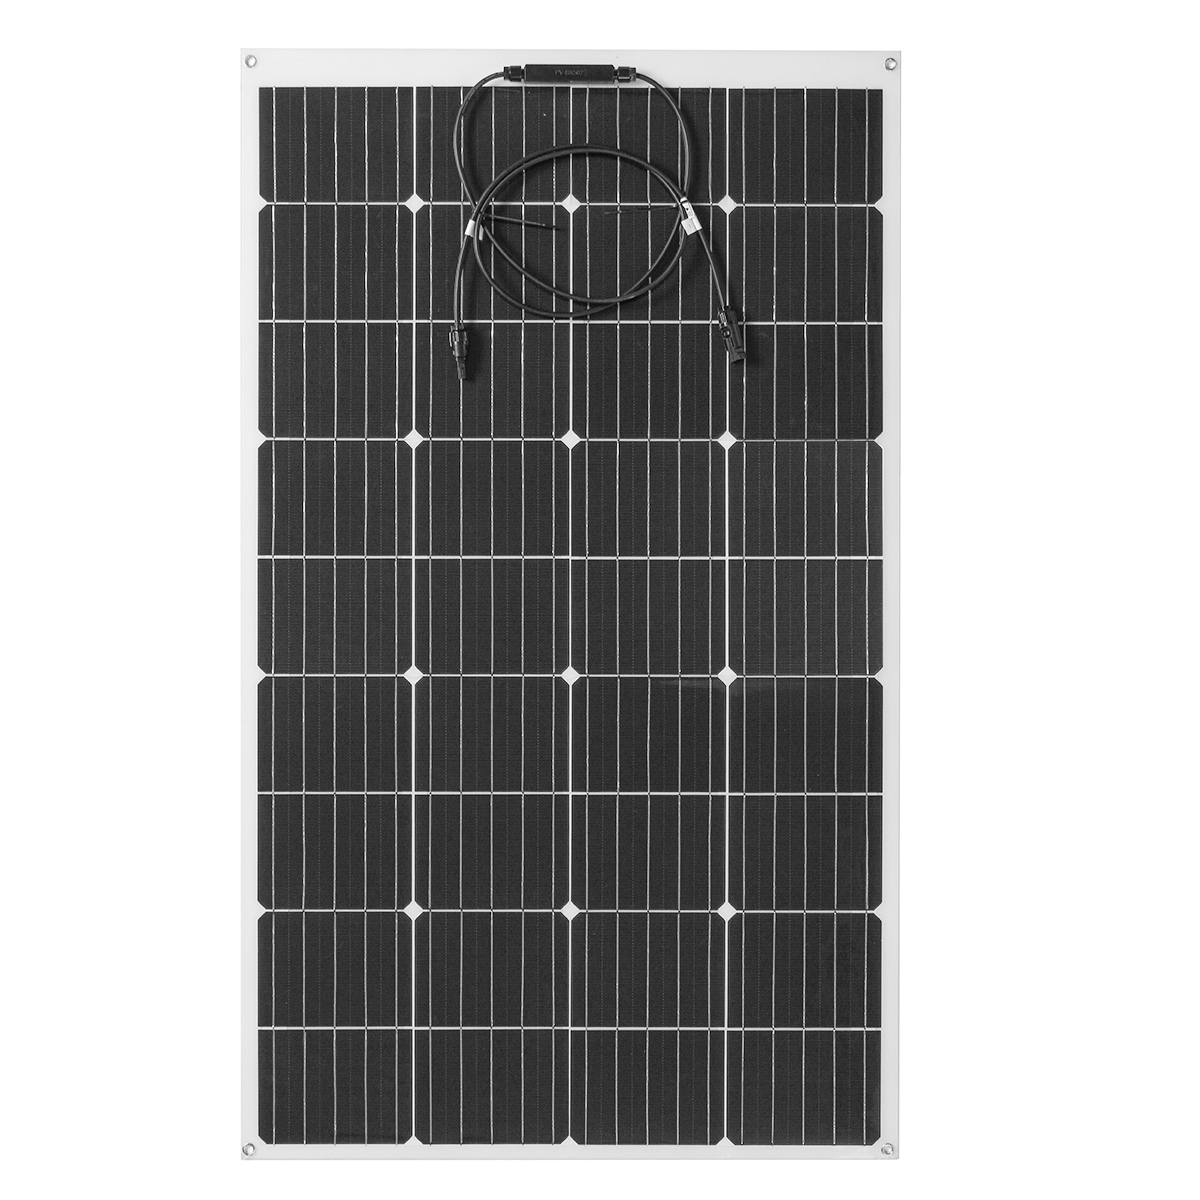 130W-18V-Highly-Flexible-Monocrystalline-Solar-Panel-Connector-Car-Boat-Camping-1664111-2